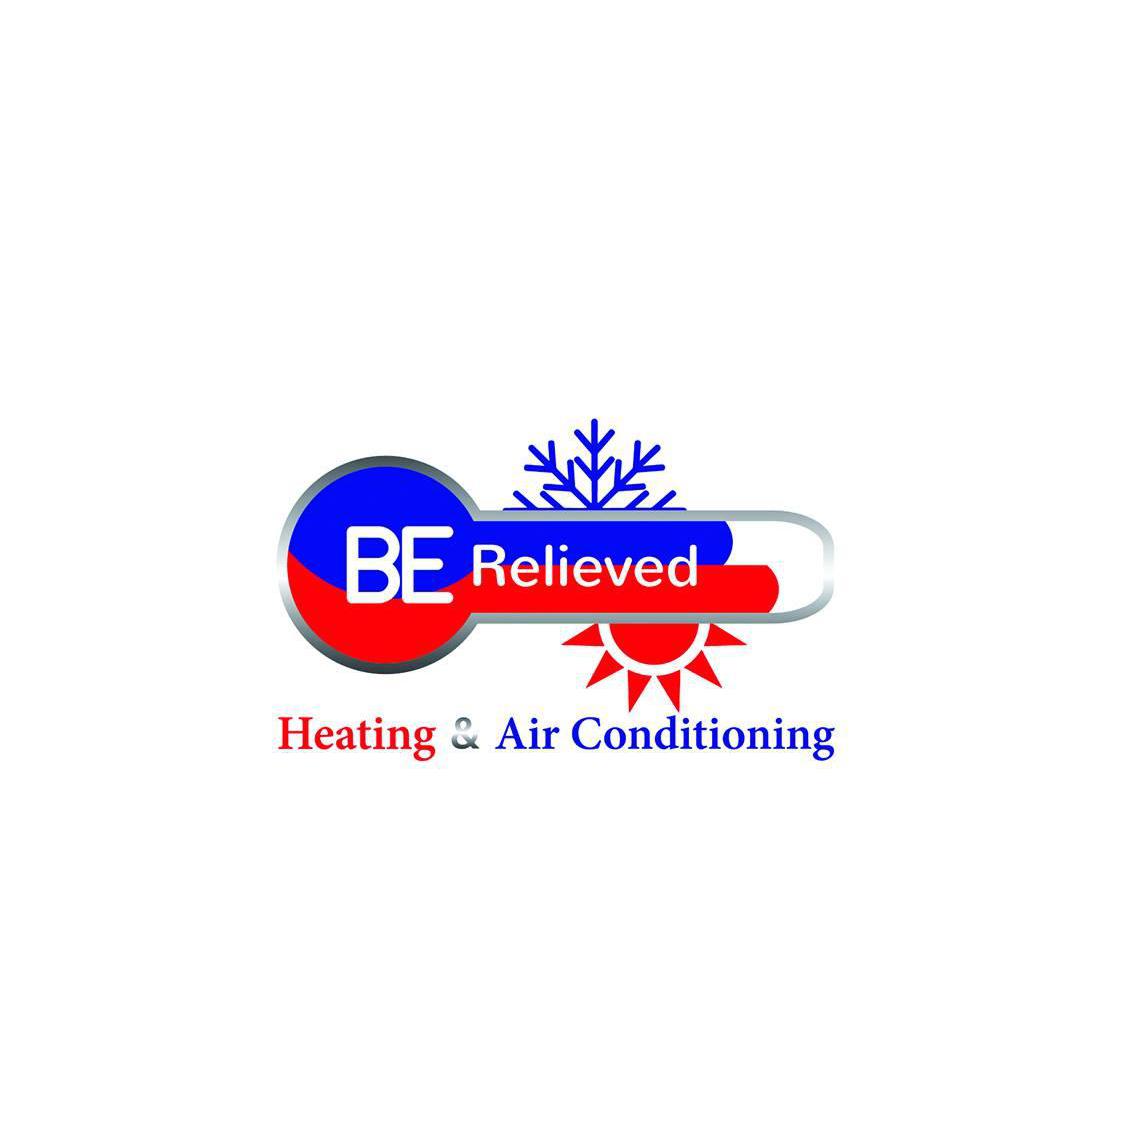 BE Relieved Heating & Air Conditioning, Inc. - Stockbridge, GA 30281 - (770)637-2337 | ShowMeLocal.com